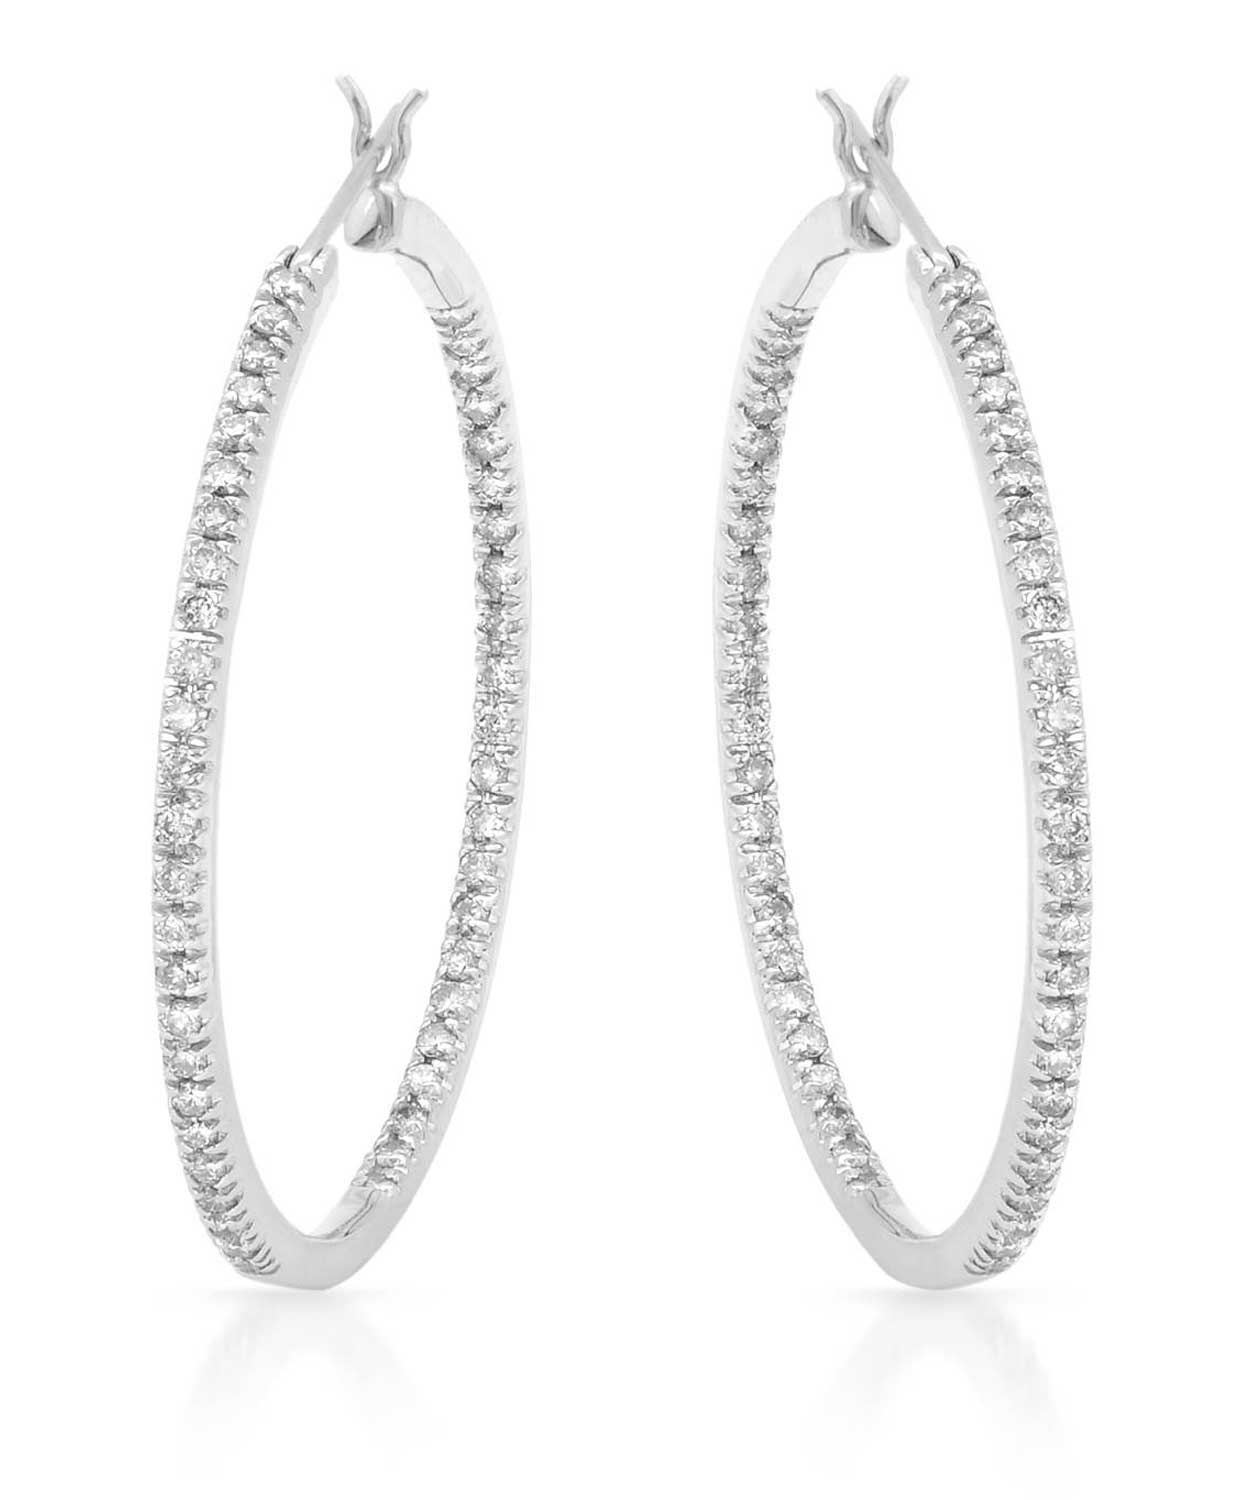 1.00 ctw Diamonds 14k White Gold Classic Inside-Out Hoop Earrings View 1